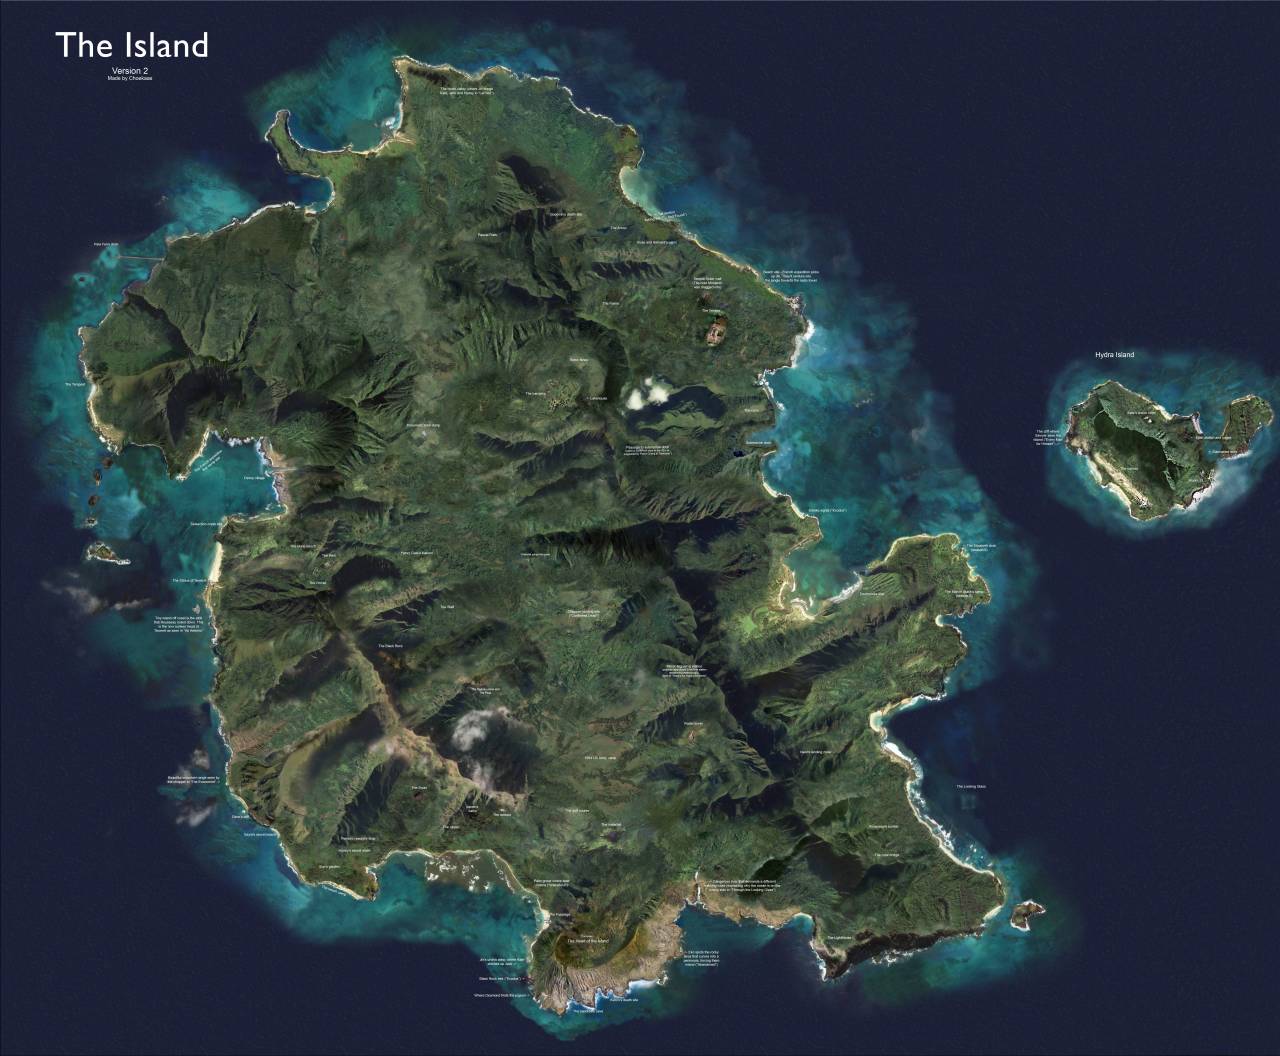 Satellite map of the Island from the TV show “Lost”.
by u/Choekaas